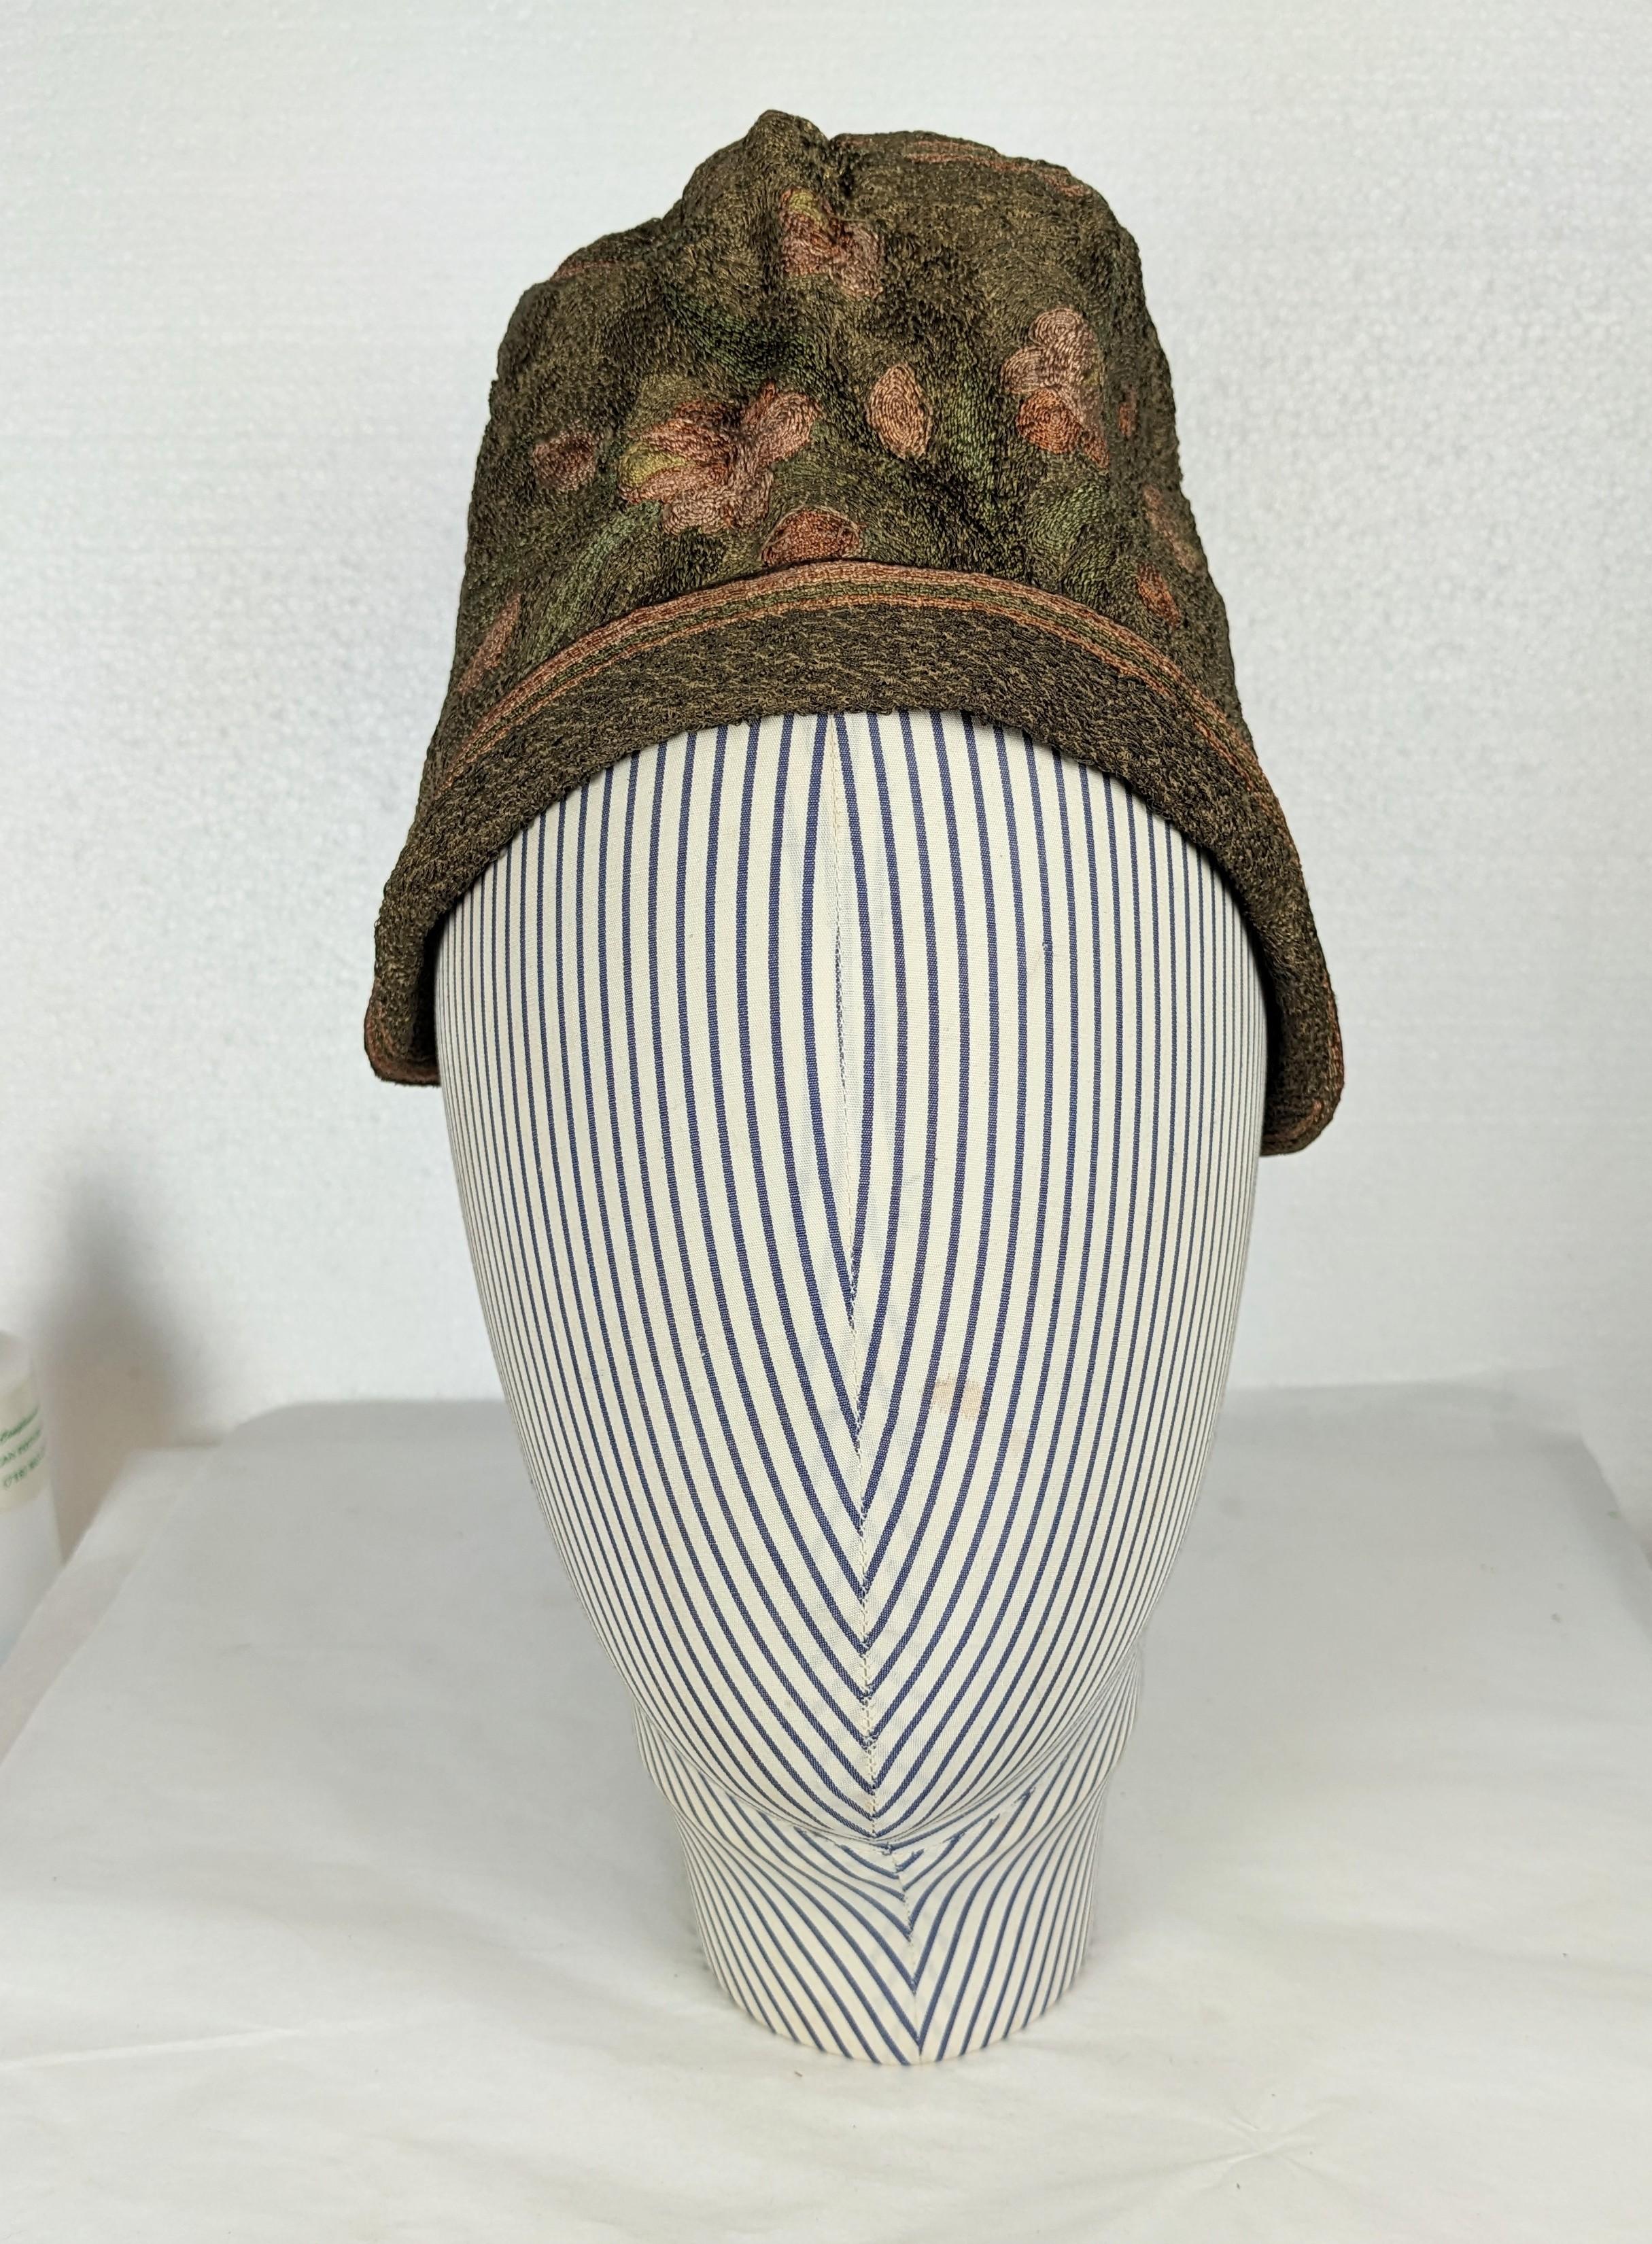 1920's Gold Lame and Needlepoint Cloche Hat. Completely hand embroidered with needlepoint flower motifs on a ground of gold lame bullion metal threads with brown velvet trim. Lined in silk taffeta. 1920's France. Small size. Height 4.5